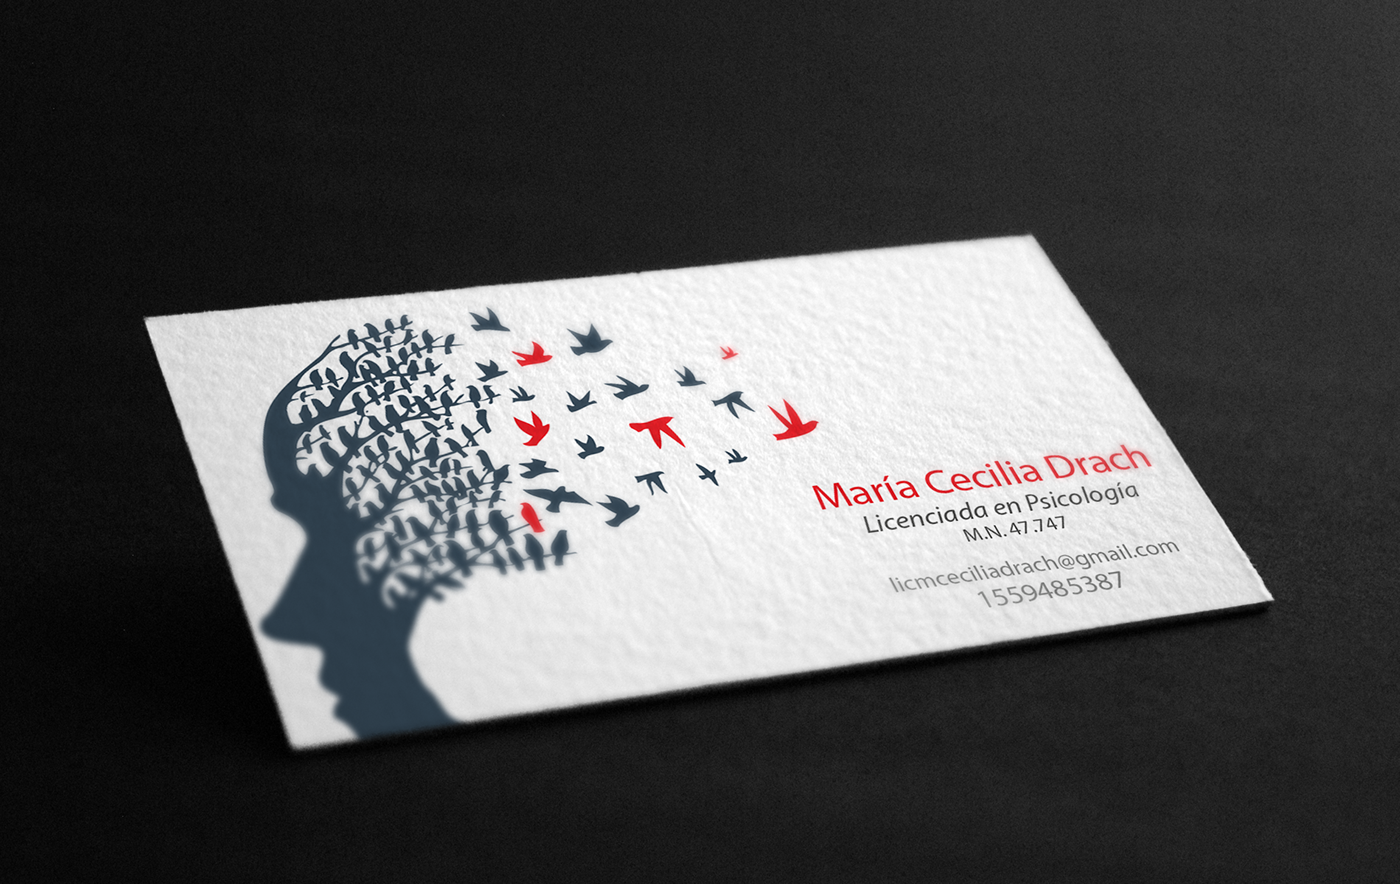 business cards for psychologists 2